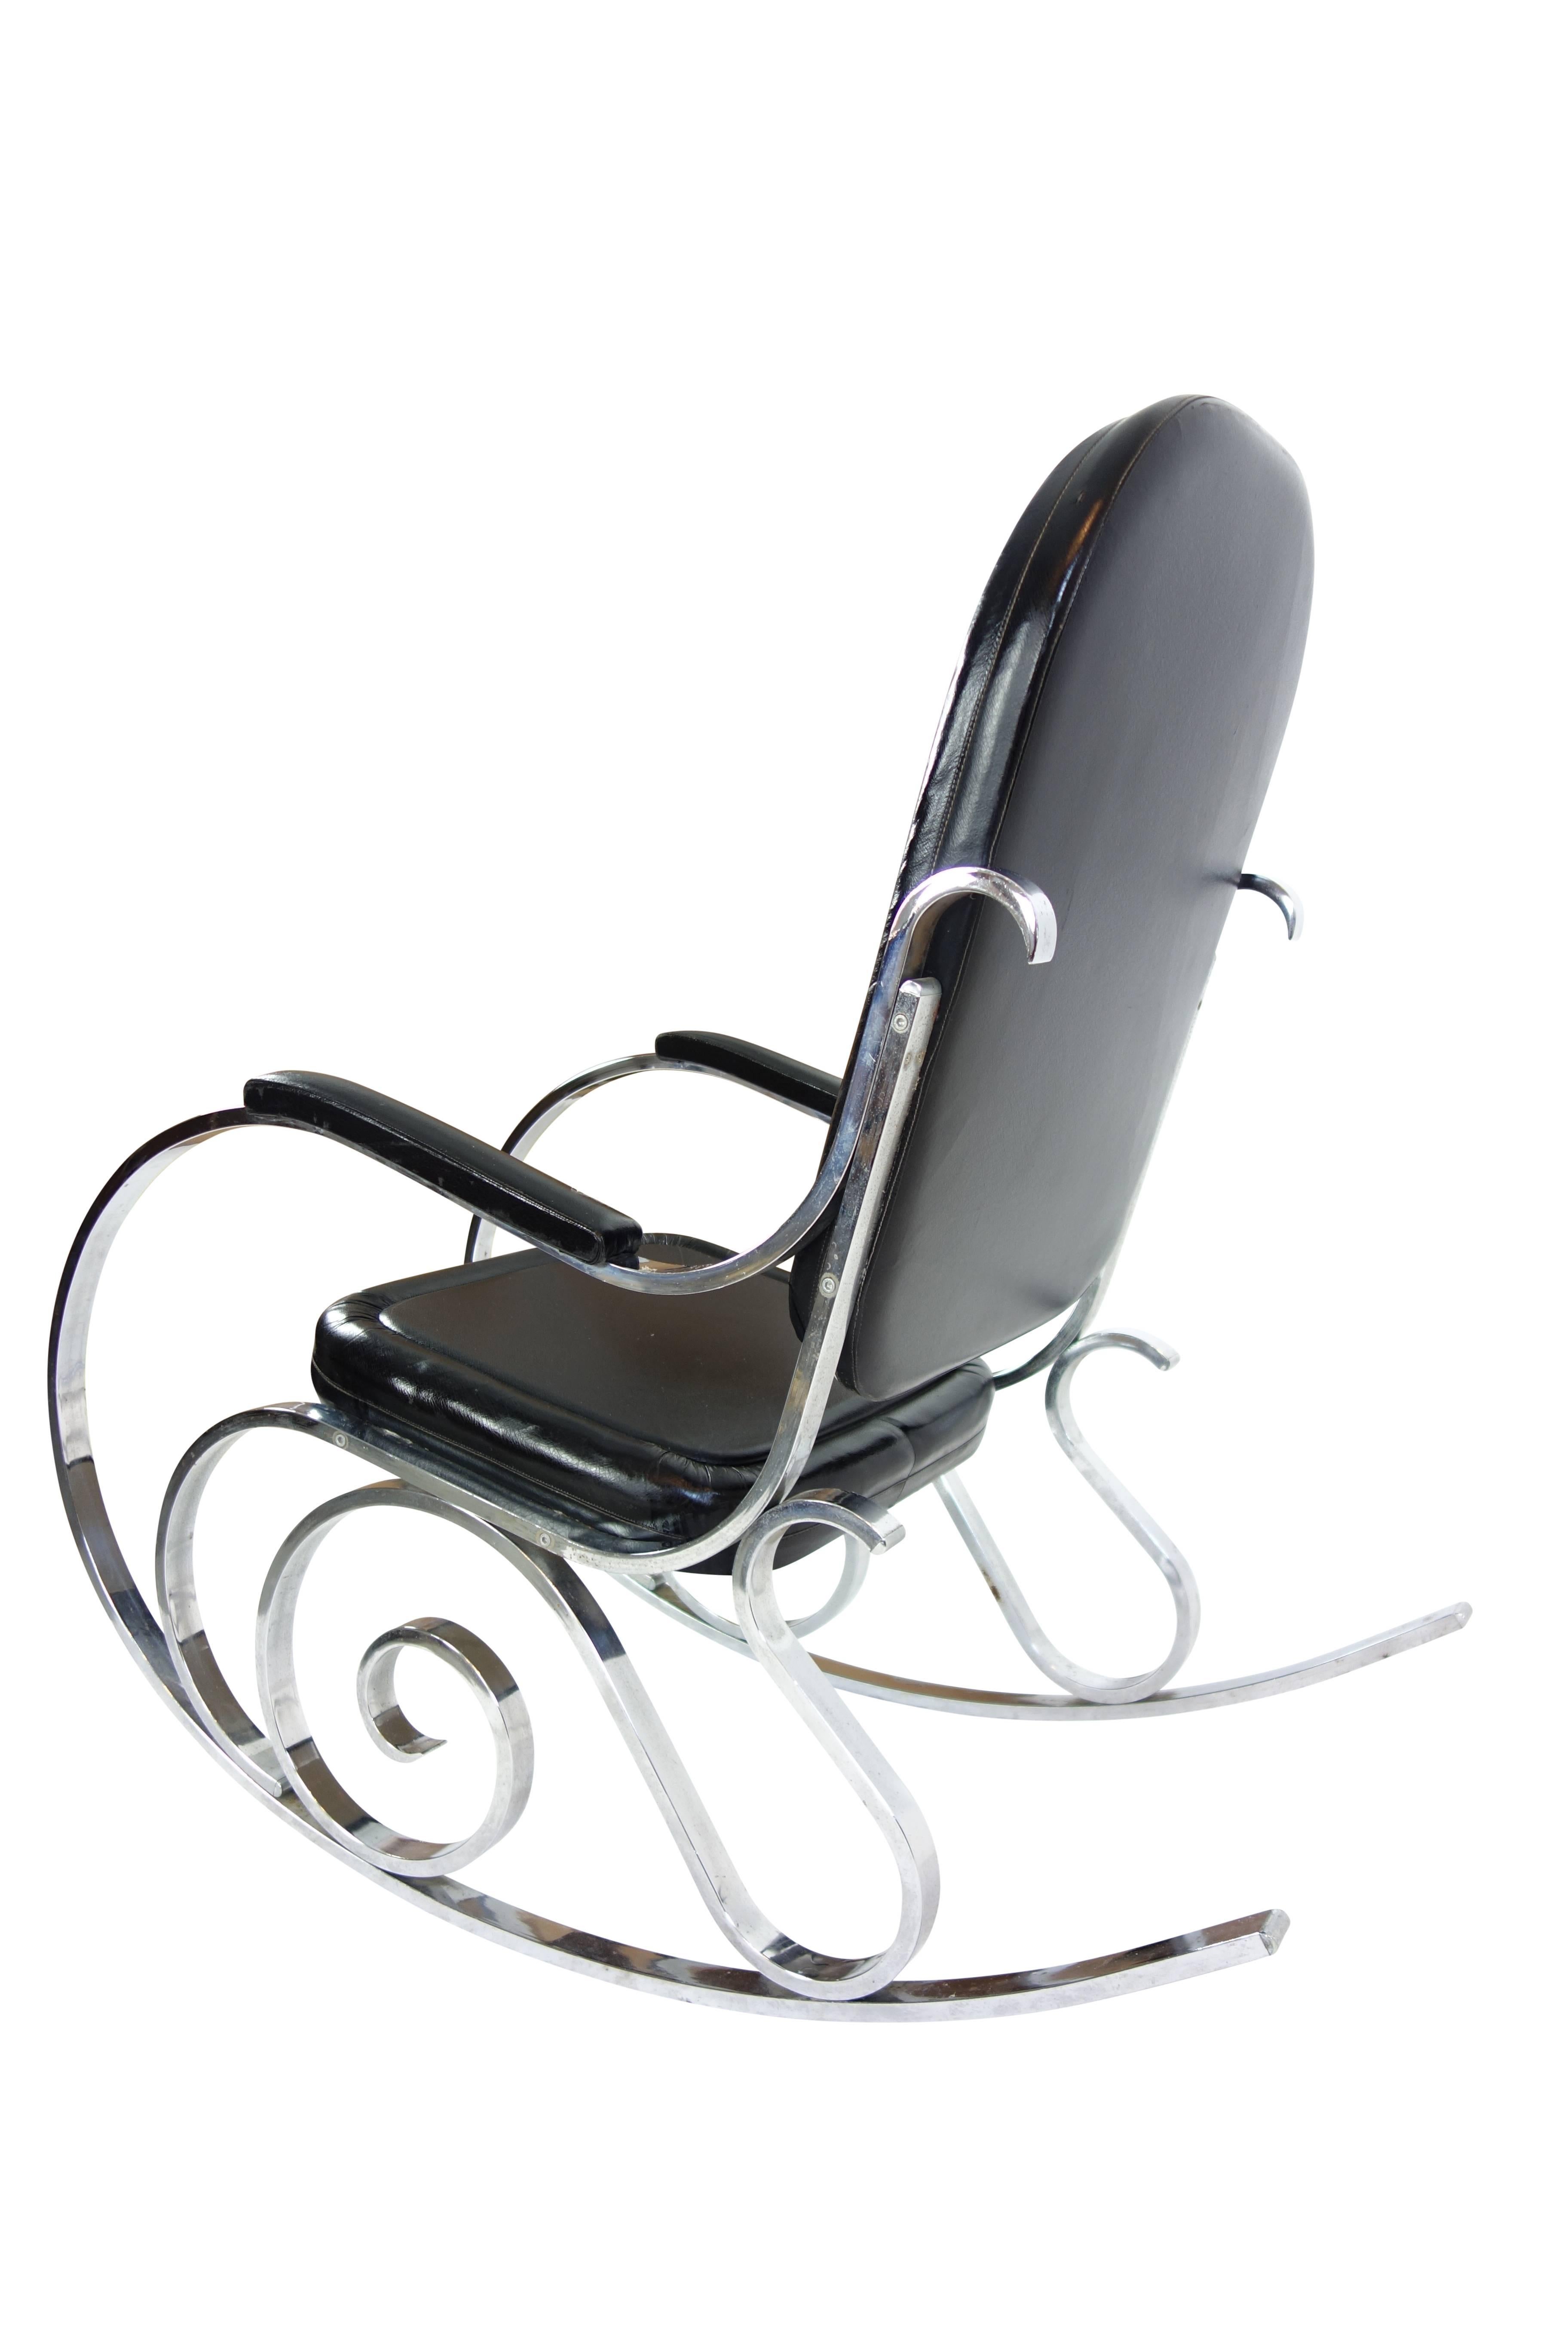 Polished Maison Jansen Black Leather Rocking Chair For Sale